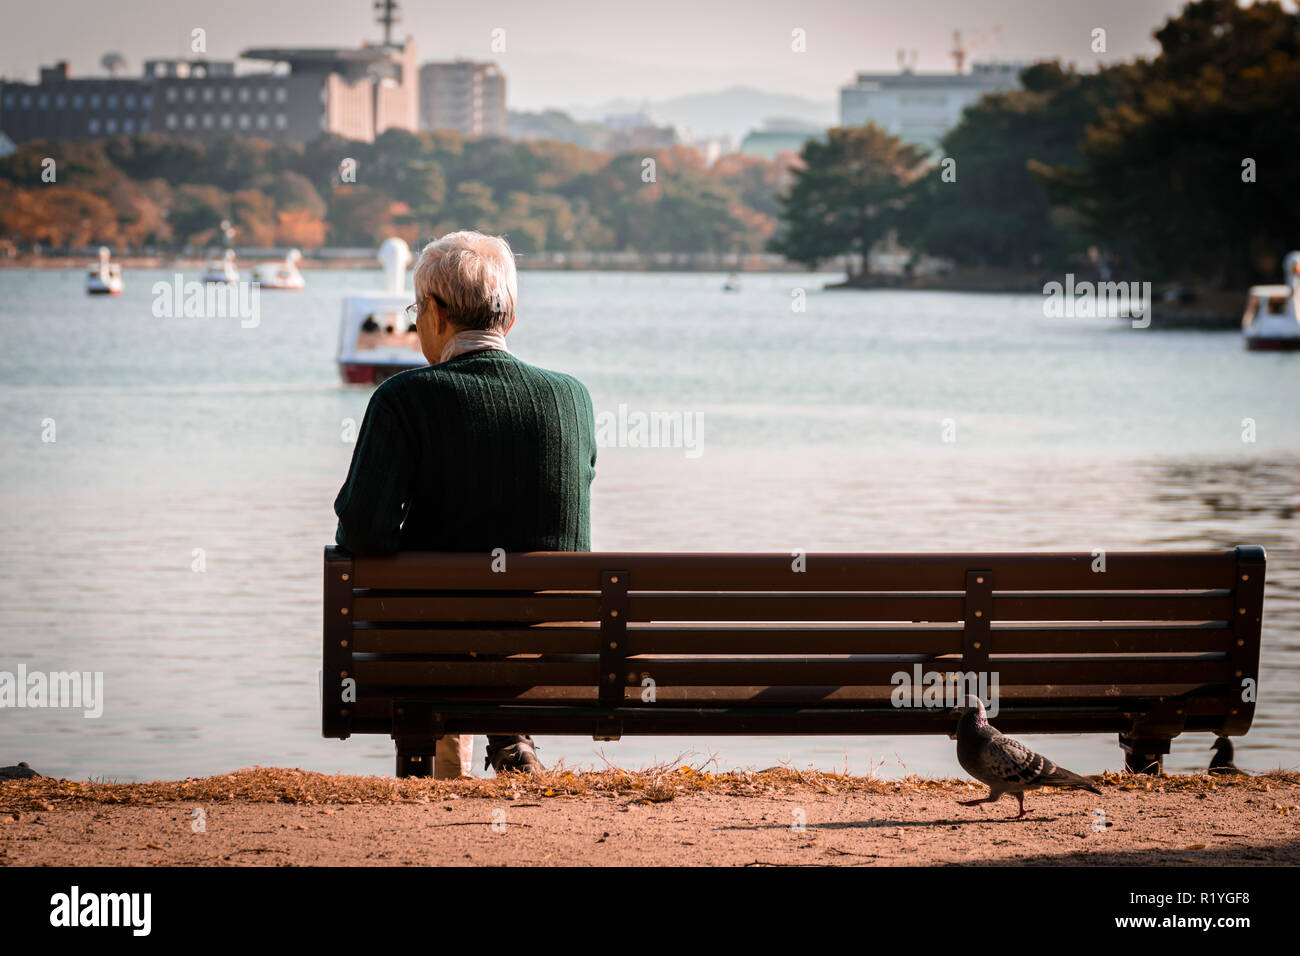 An Lonely Or Sad Old Man Alone Sitting On The Bench In Sunset Looking At A Big Pond And Thinking Stock Photo Alamy